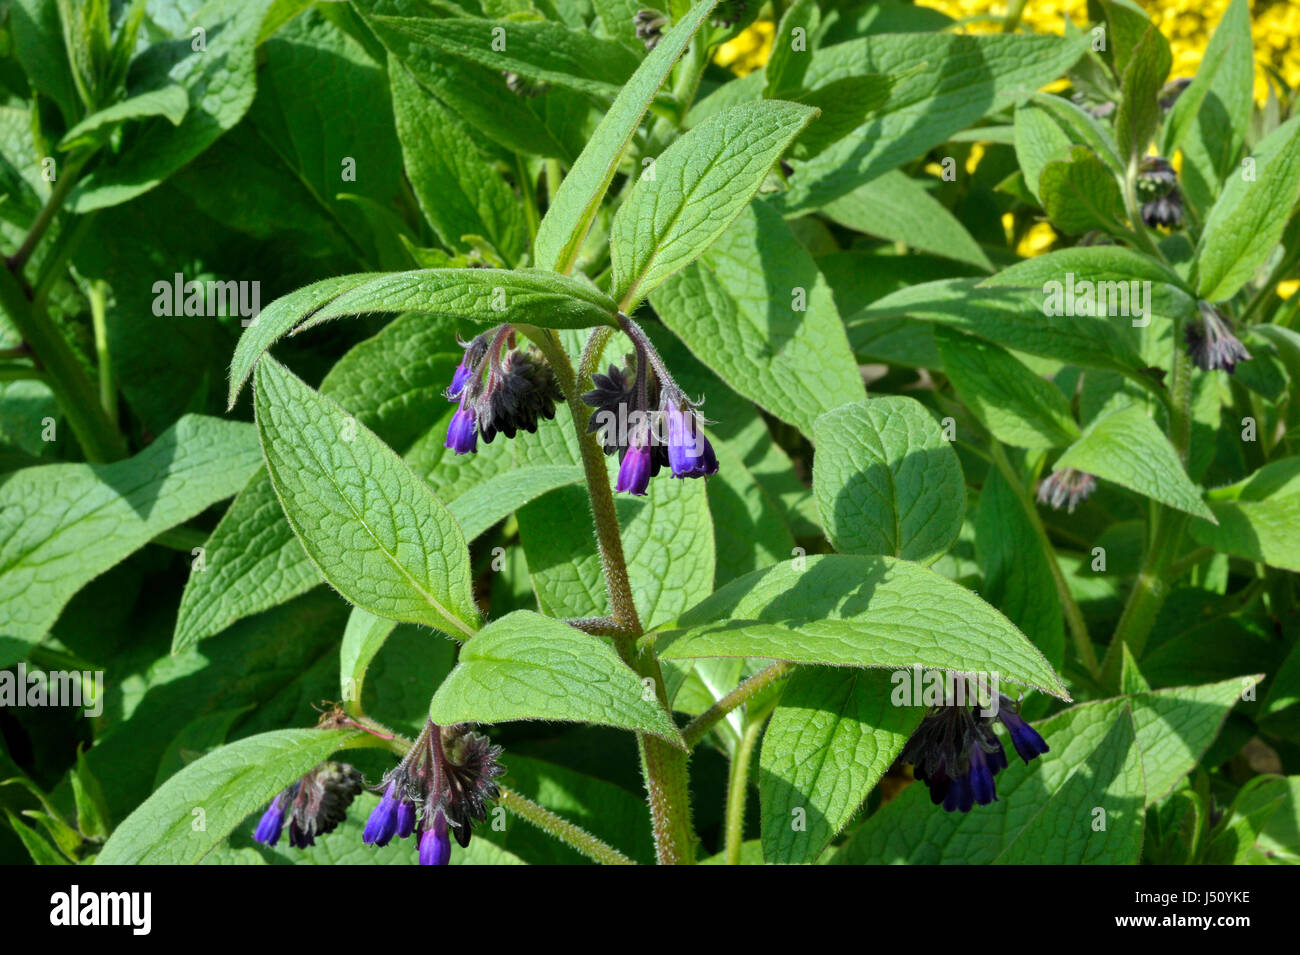 Comfrey plants flowering in a garden, genus symphytum Bocking 14 cultivar of Russian Comfrey also spelt comphrey, a herb which is prized by organic ga Stock Photo